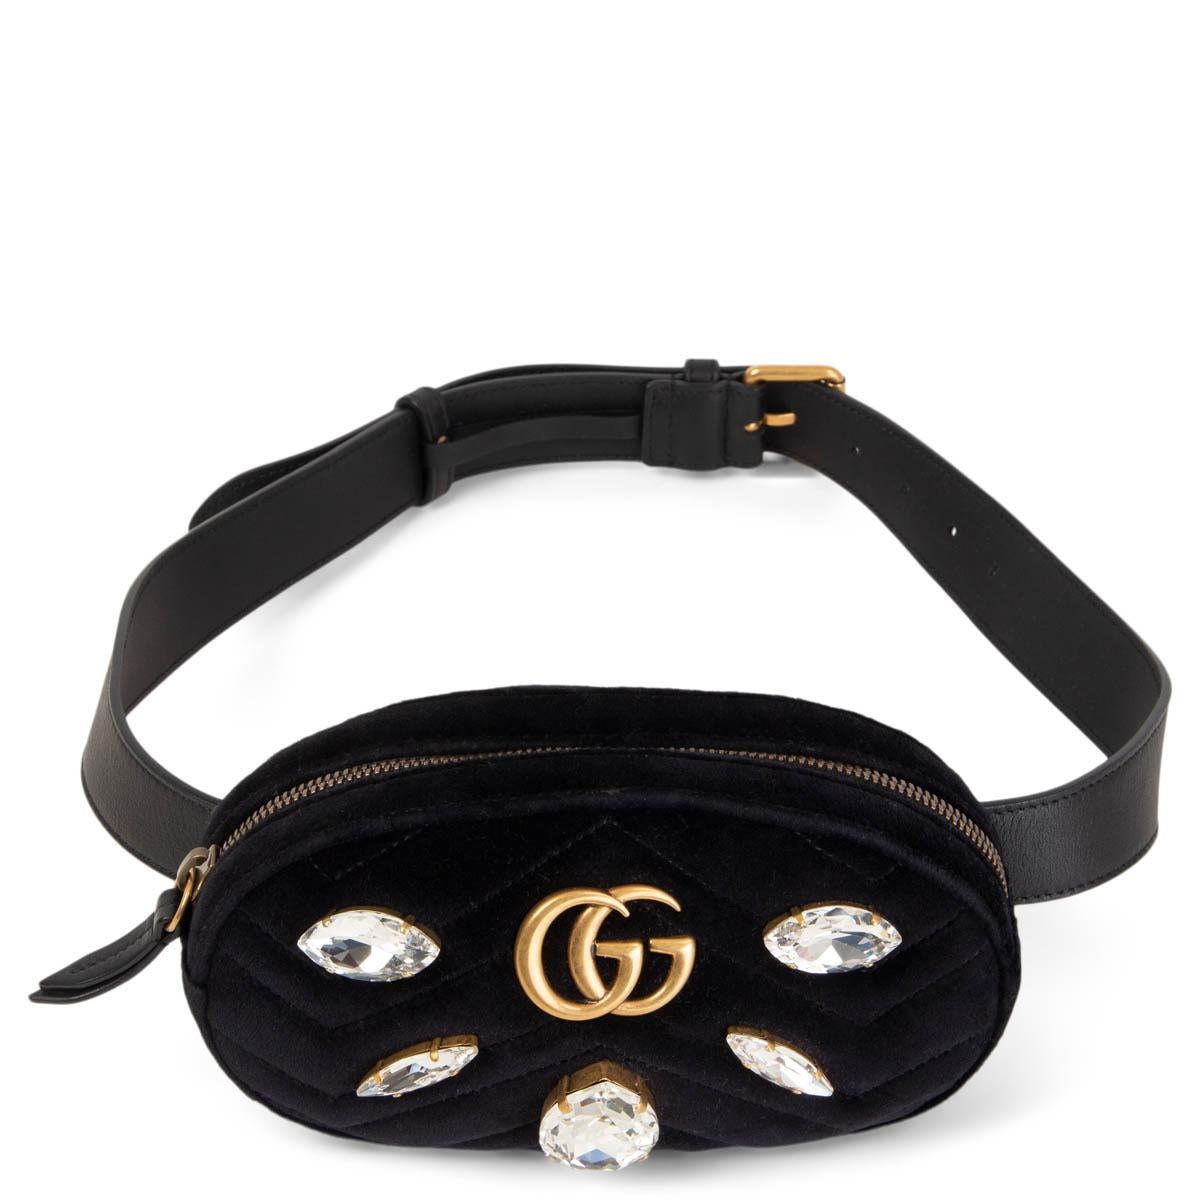 100% authentic Gucci GG Marmont Crystal & Velvet Belt Bag in black velvet with a leather belt strap. Open with a zipper on top and is lined in pink satin with one patch pocket. Has been carried once and is in virtually new condition. Comes with dust